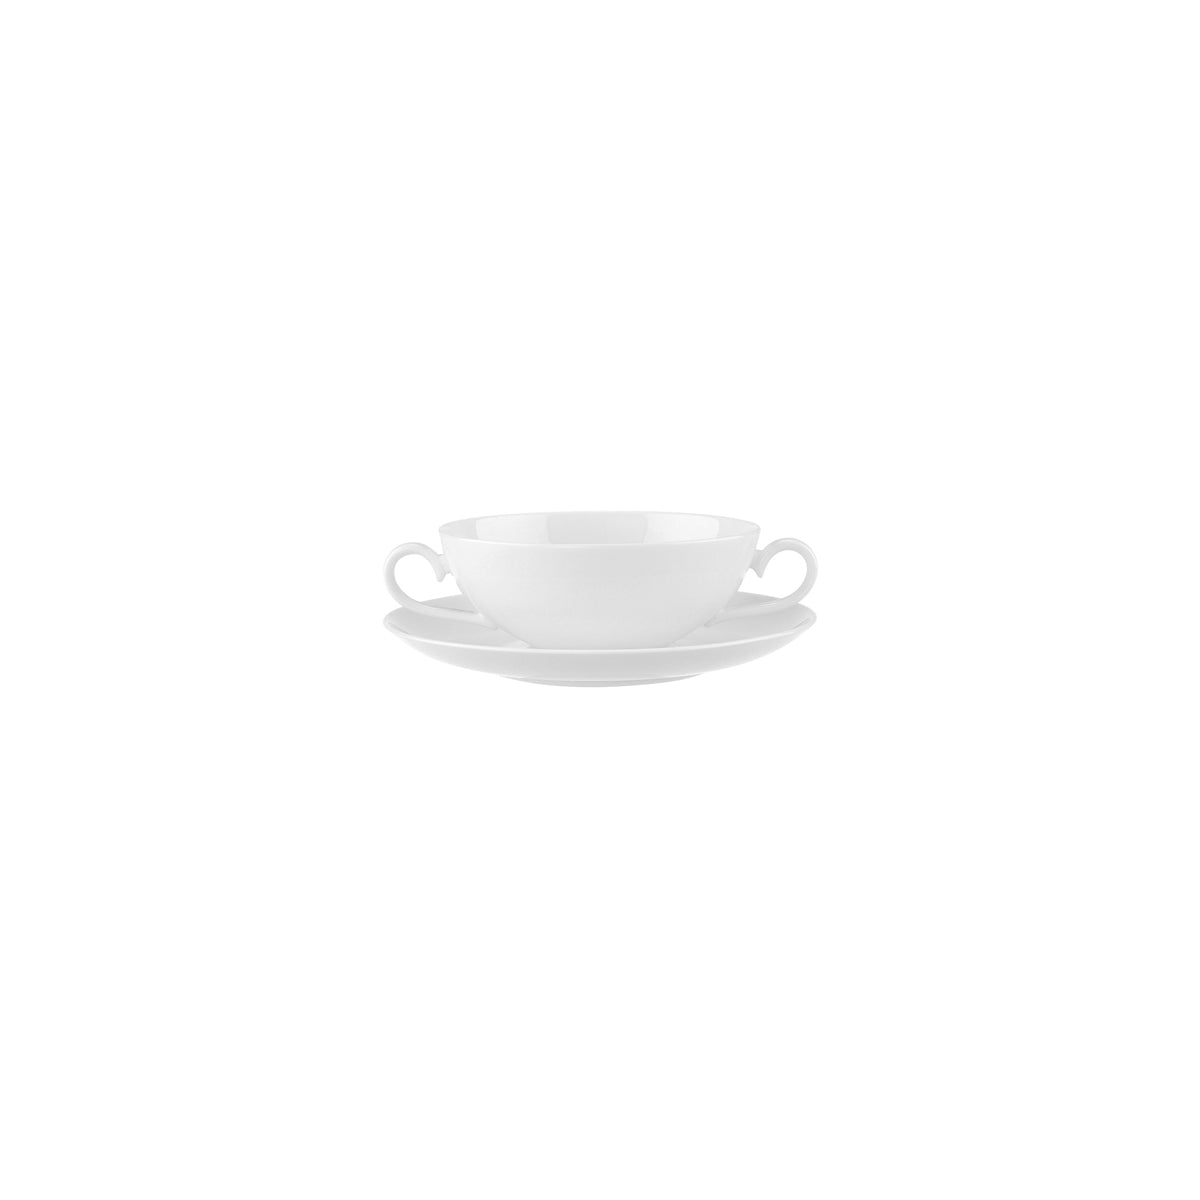 VB16-3272-2520 Villeroy And Boch Villeroy And Boch Stella Hotel White Soup Cup Saucer 175mm Tomkin Australia Hospitality Supplies